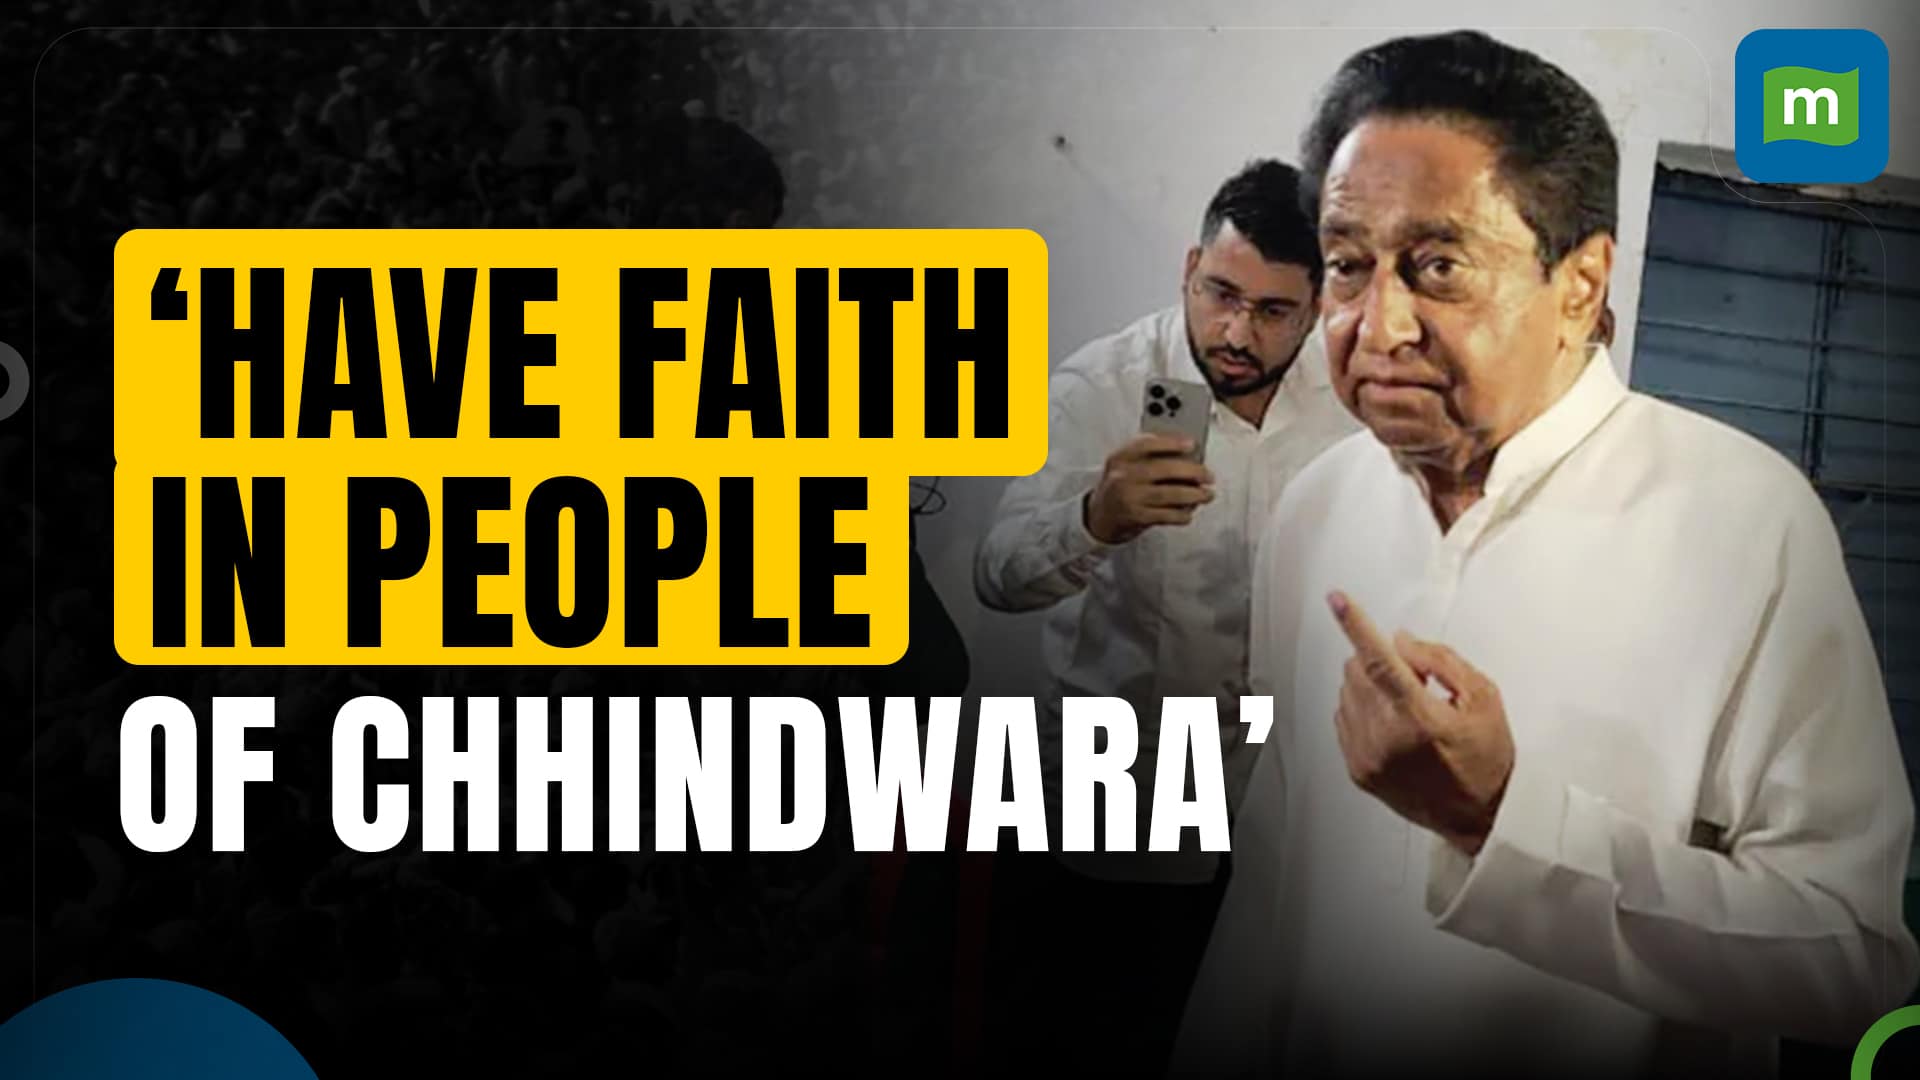 Former Chief Minister Kamal Nath casts his vote in Chhindwara | Phase 1 Lok Sabha Elections